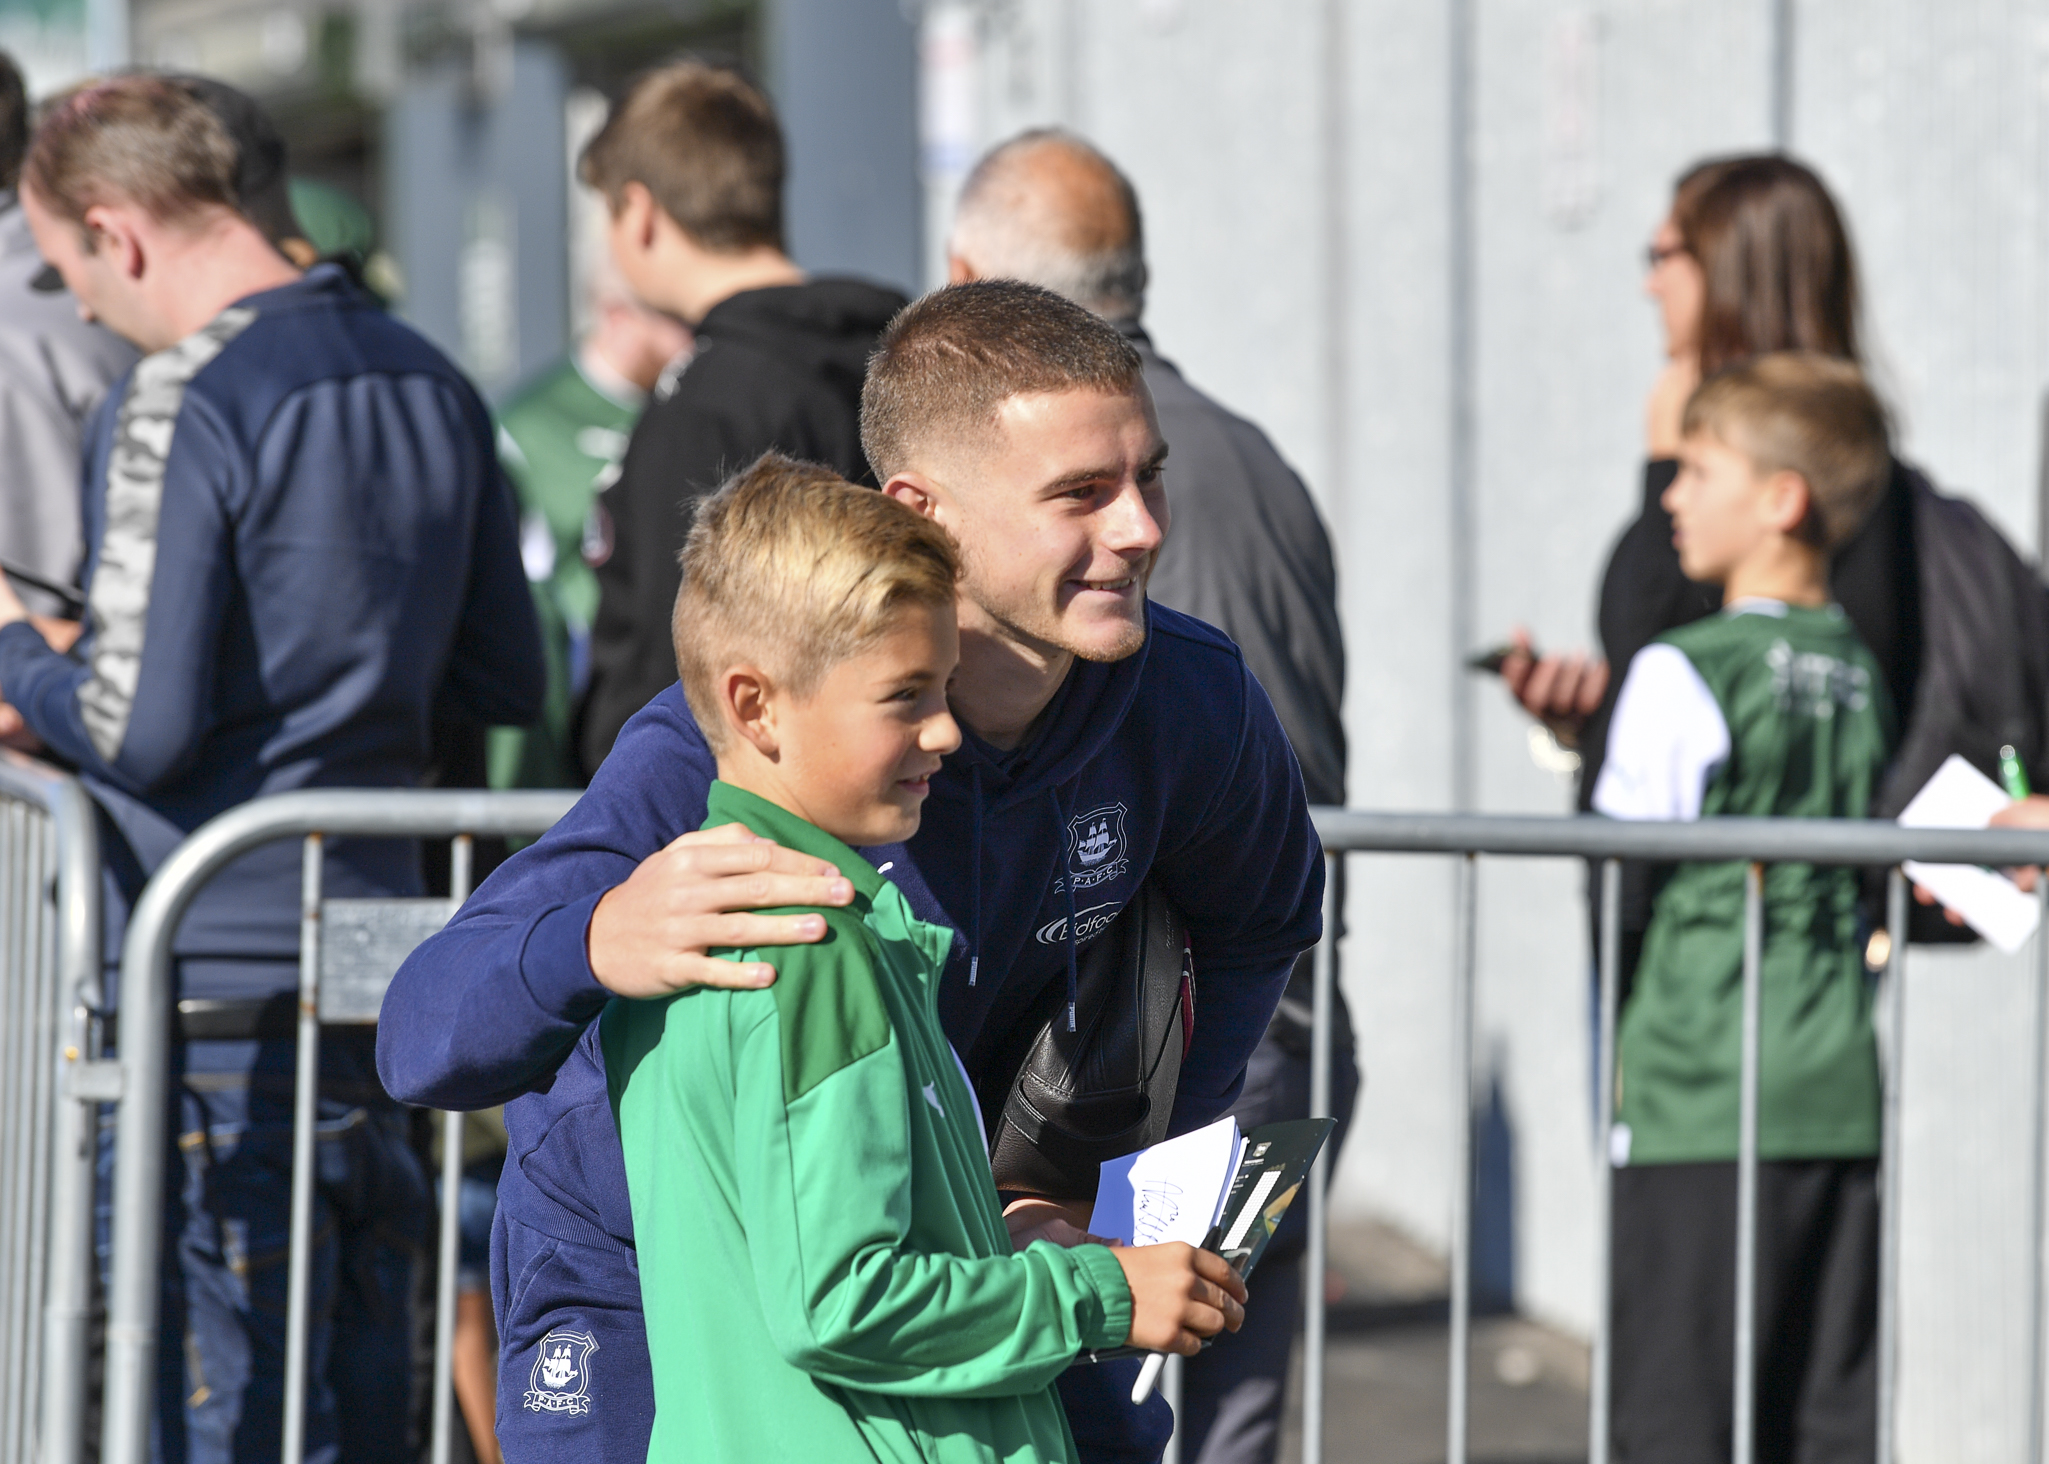 Adam Randell with young fan